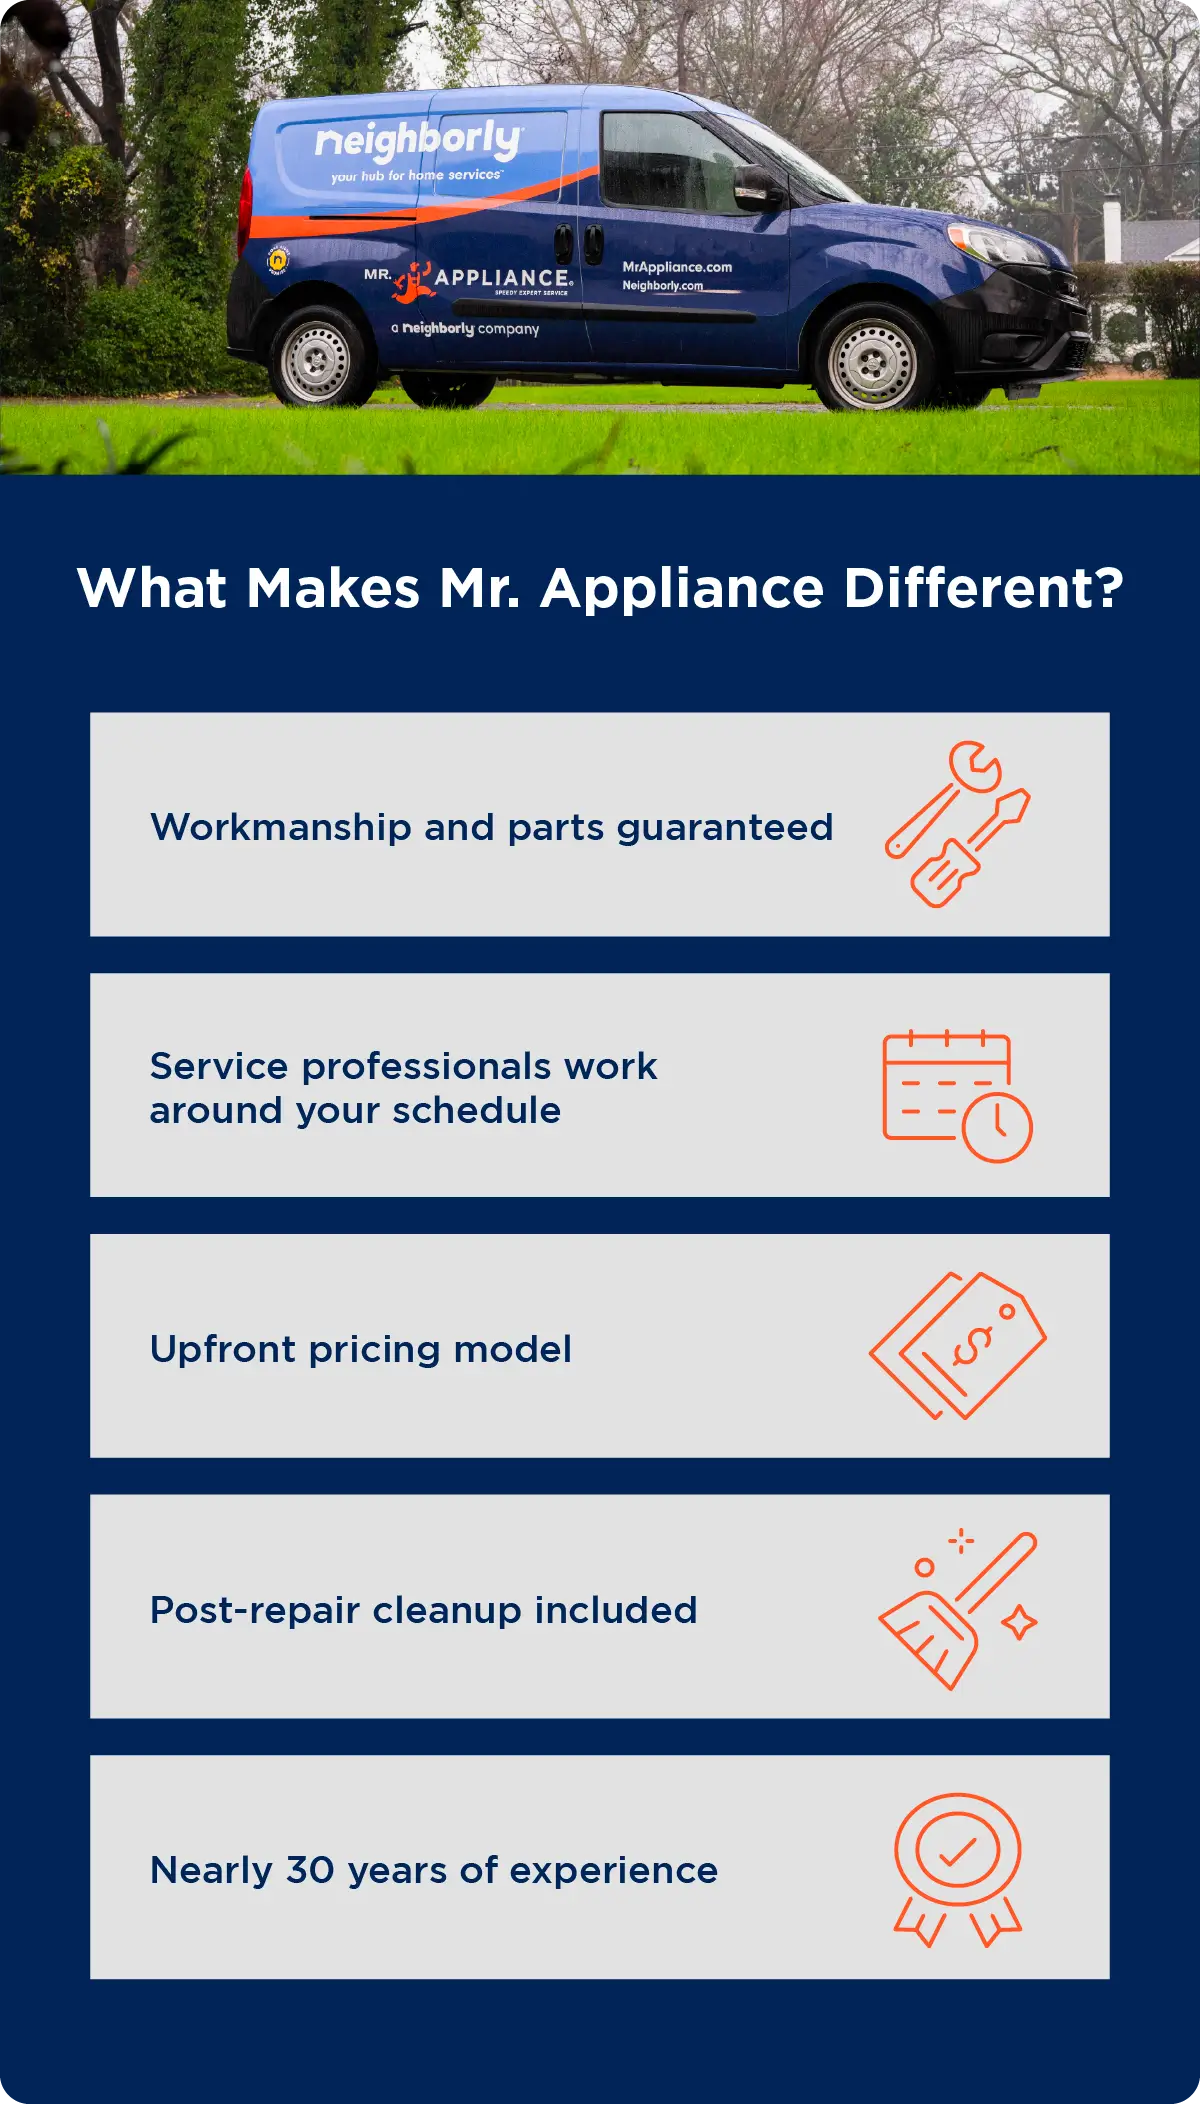 What makes Mr. Appliance stand out from other repair providers: workmanship and parts guaranteed, service professionals work around your schedule, upfront pricing model, post-repair cleanup included, nearly 30 years of experience.